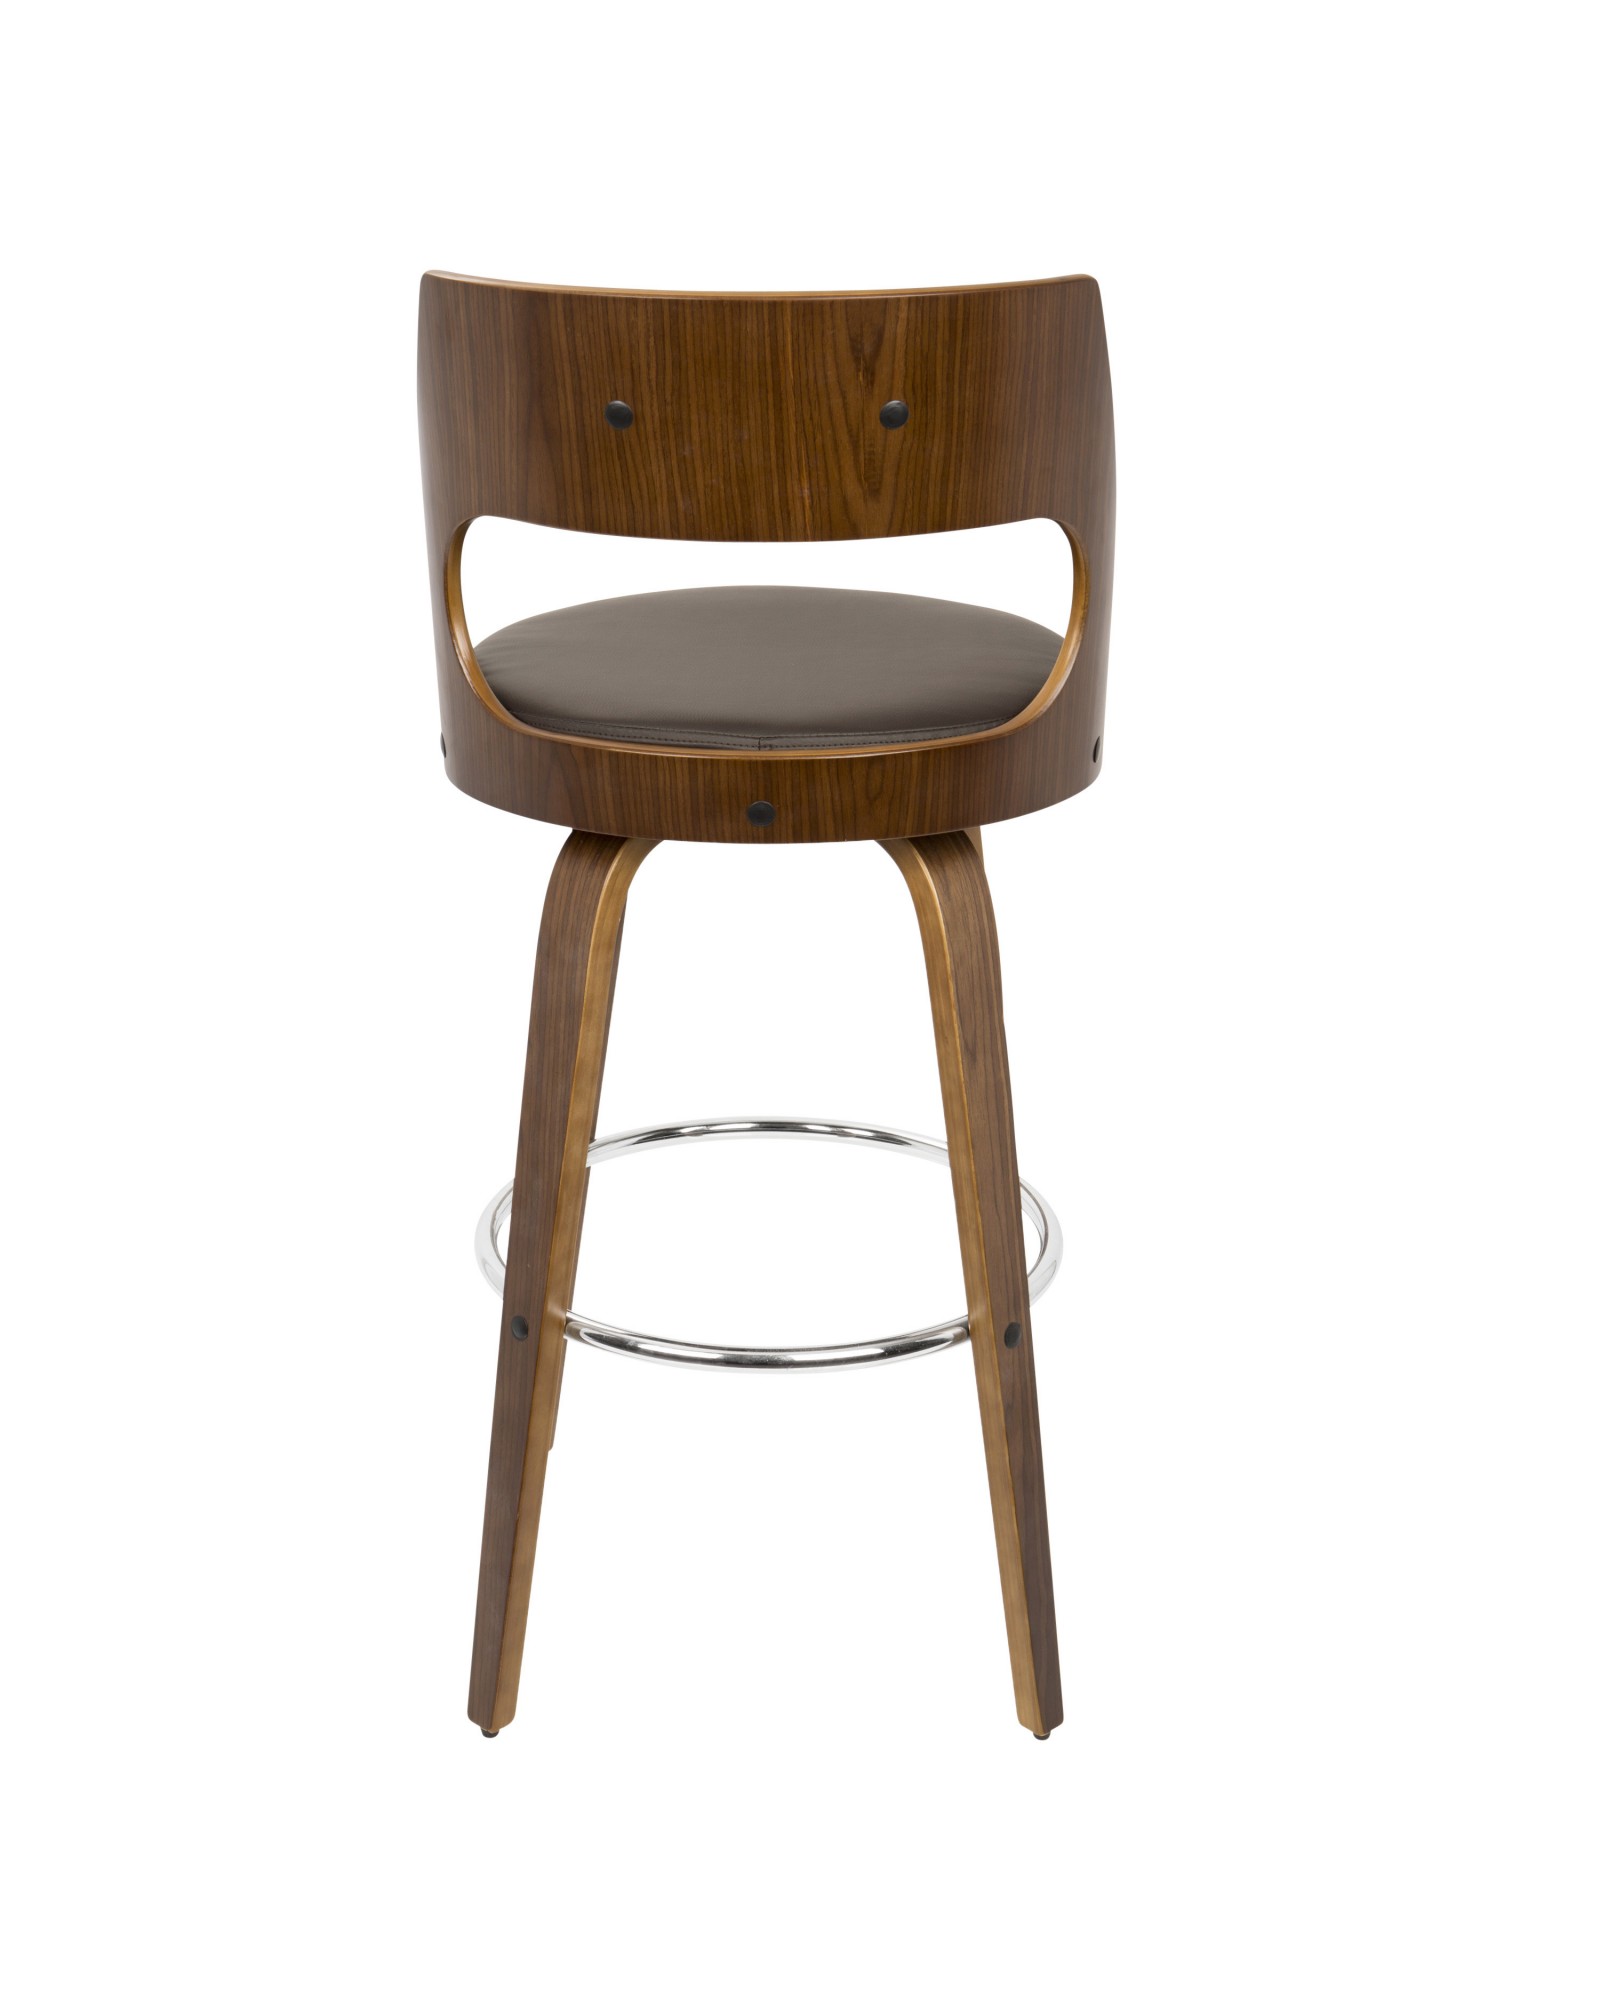 Cecina Mid-Century Modern Barstool with Swivel in Walnut and Brown Faux Leather